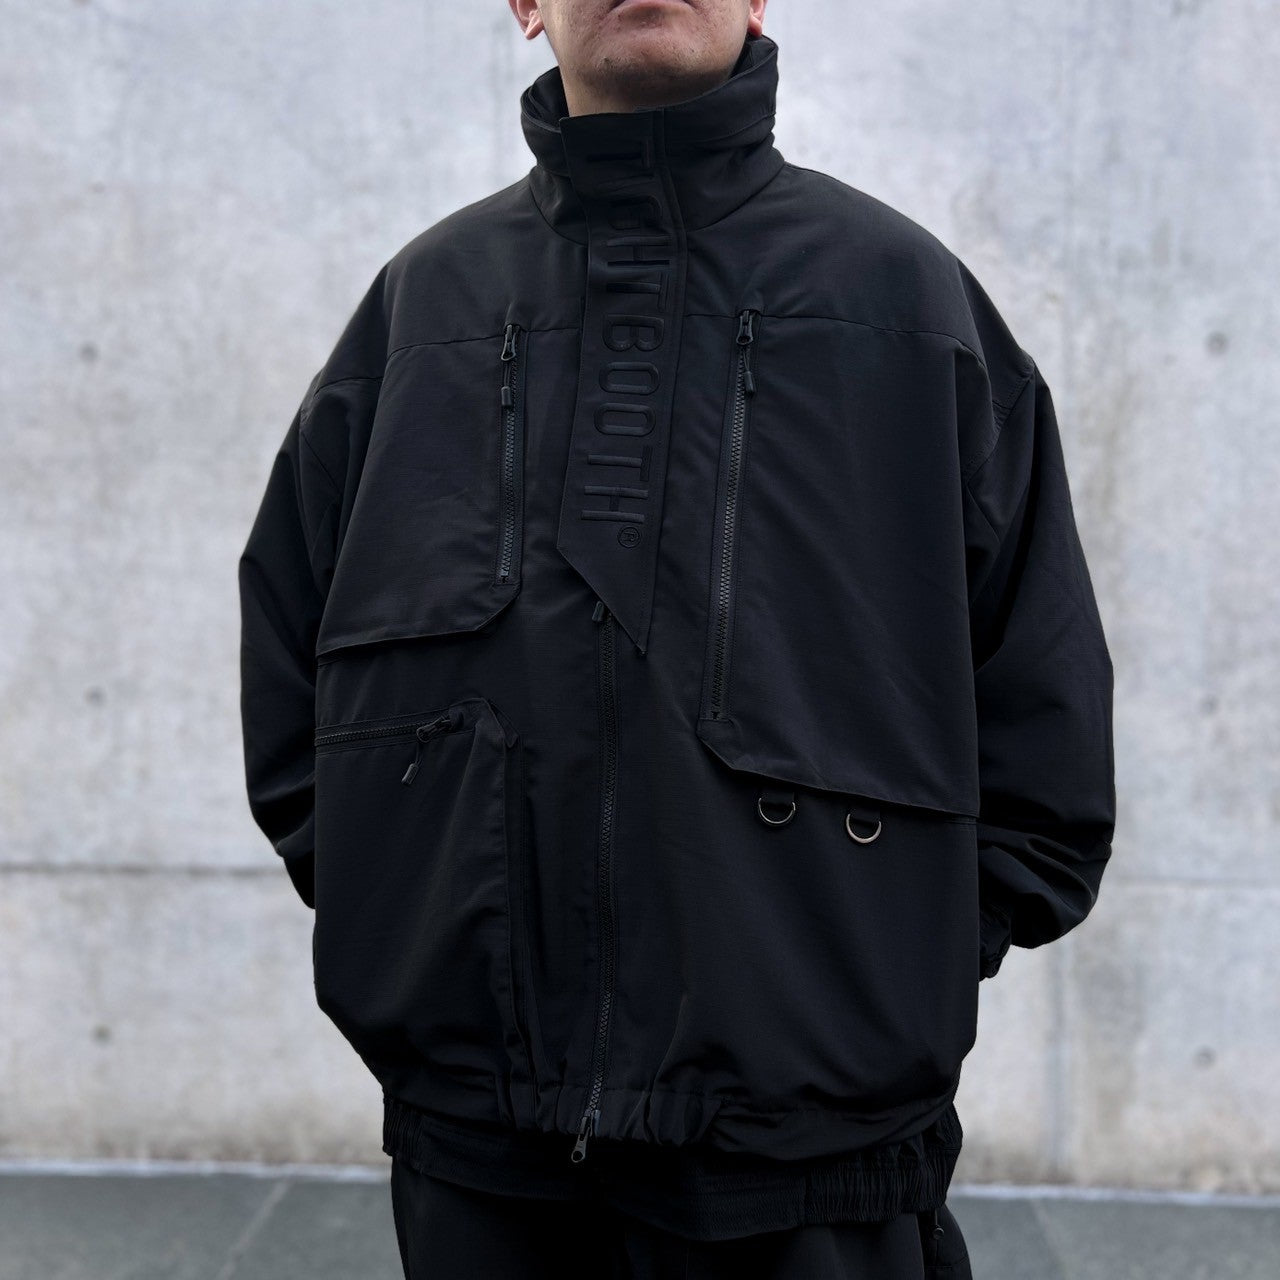 TIGHTBOOTH / RIPSTOP TACTICAL JKT　